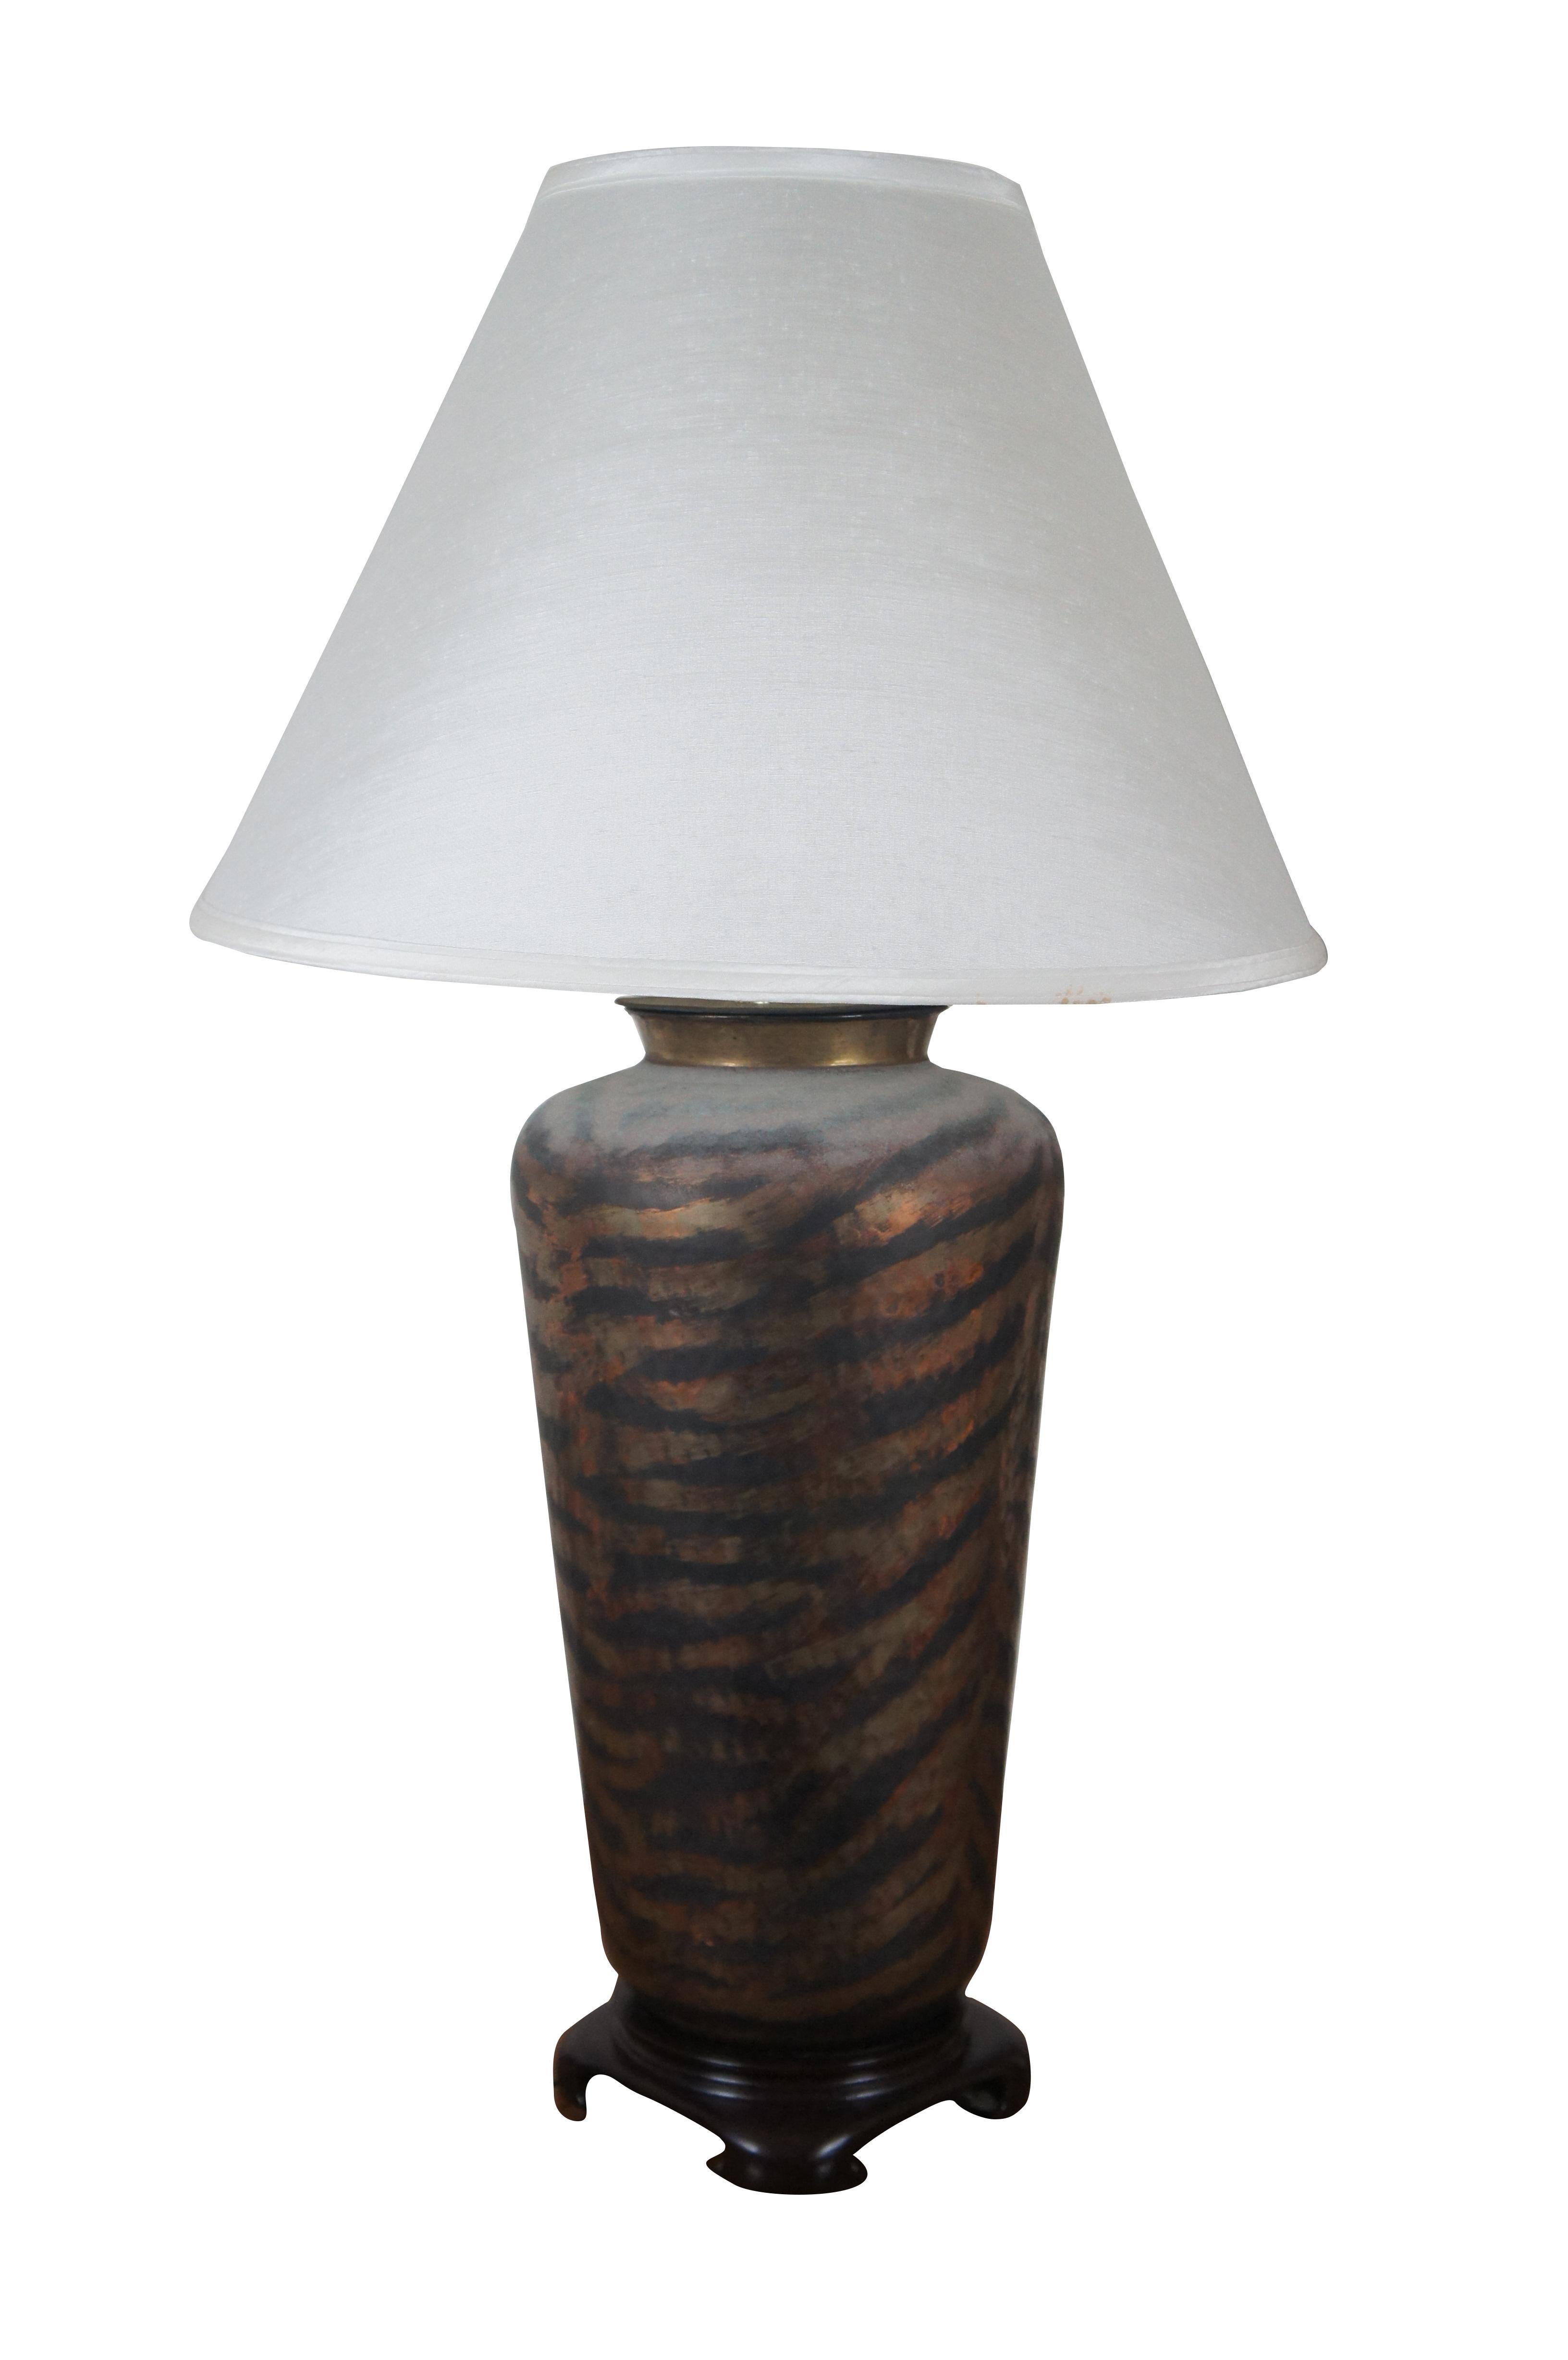 Pair of vintage urn shaped hammered brass / copper table lamps on Chinoiserie style wood bases, painted with a semi-abstract zebra or tiger stripe pattern. Includes white shades.

Dimensions:
9.5” x 23.5” / Shade - 20” x 13” / Total Height –